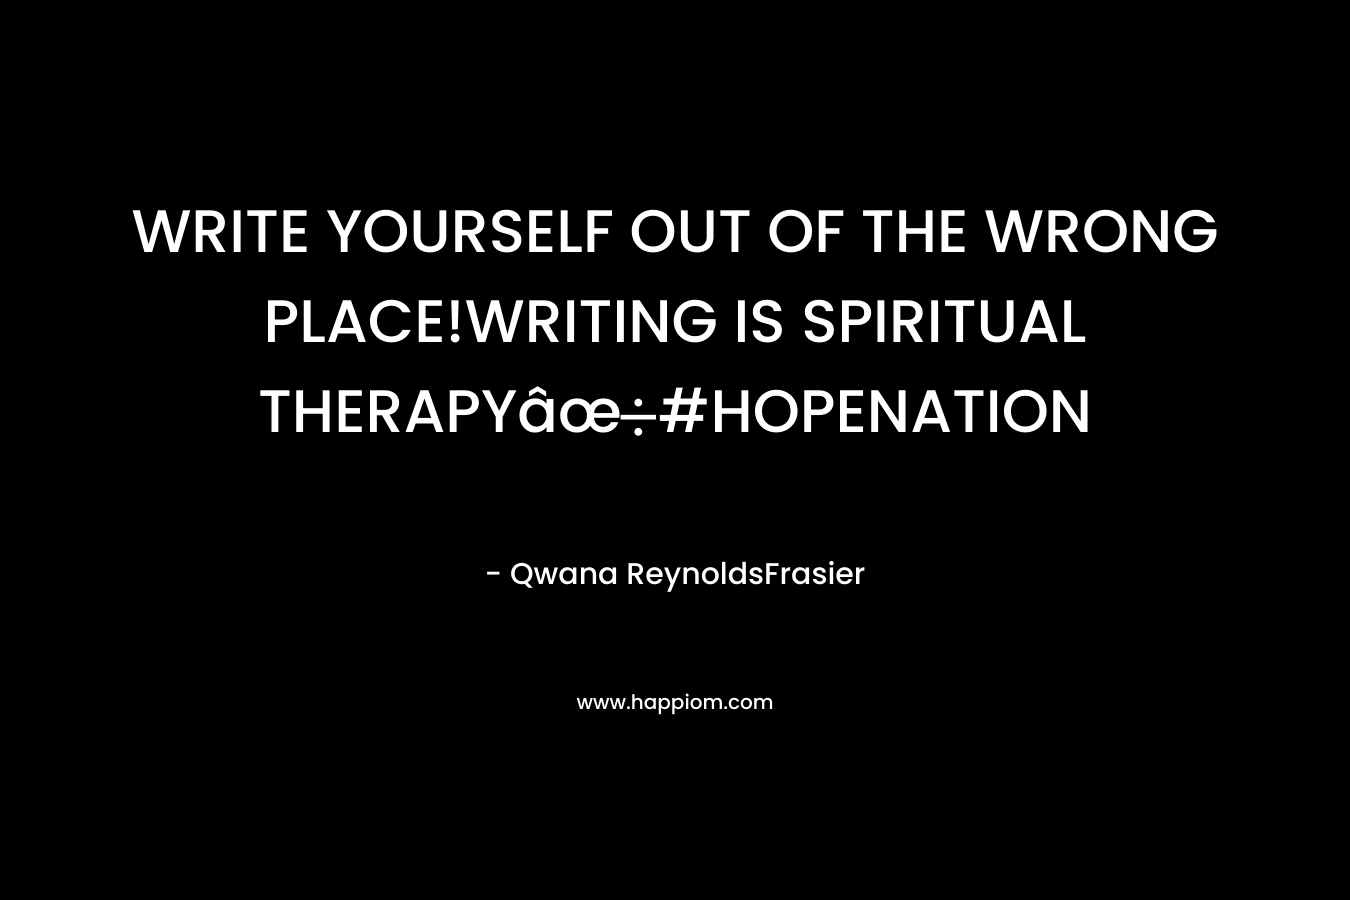 WRITE YOURSELF OUT OF THE WRONG PLACE!WRITING IS SPIRITUAL THERAPYâœ#HOPENATION